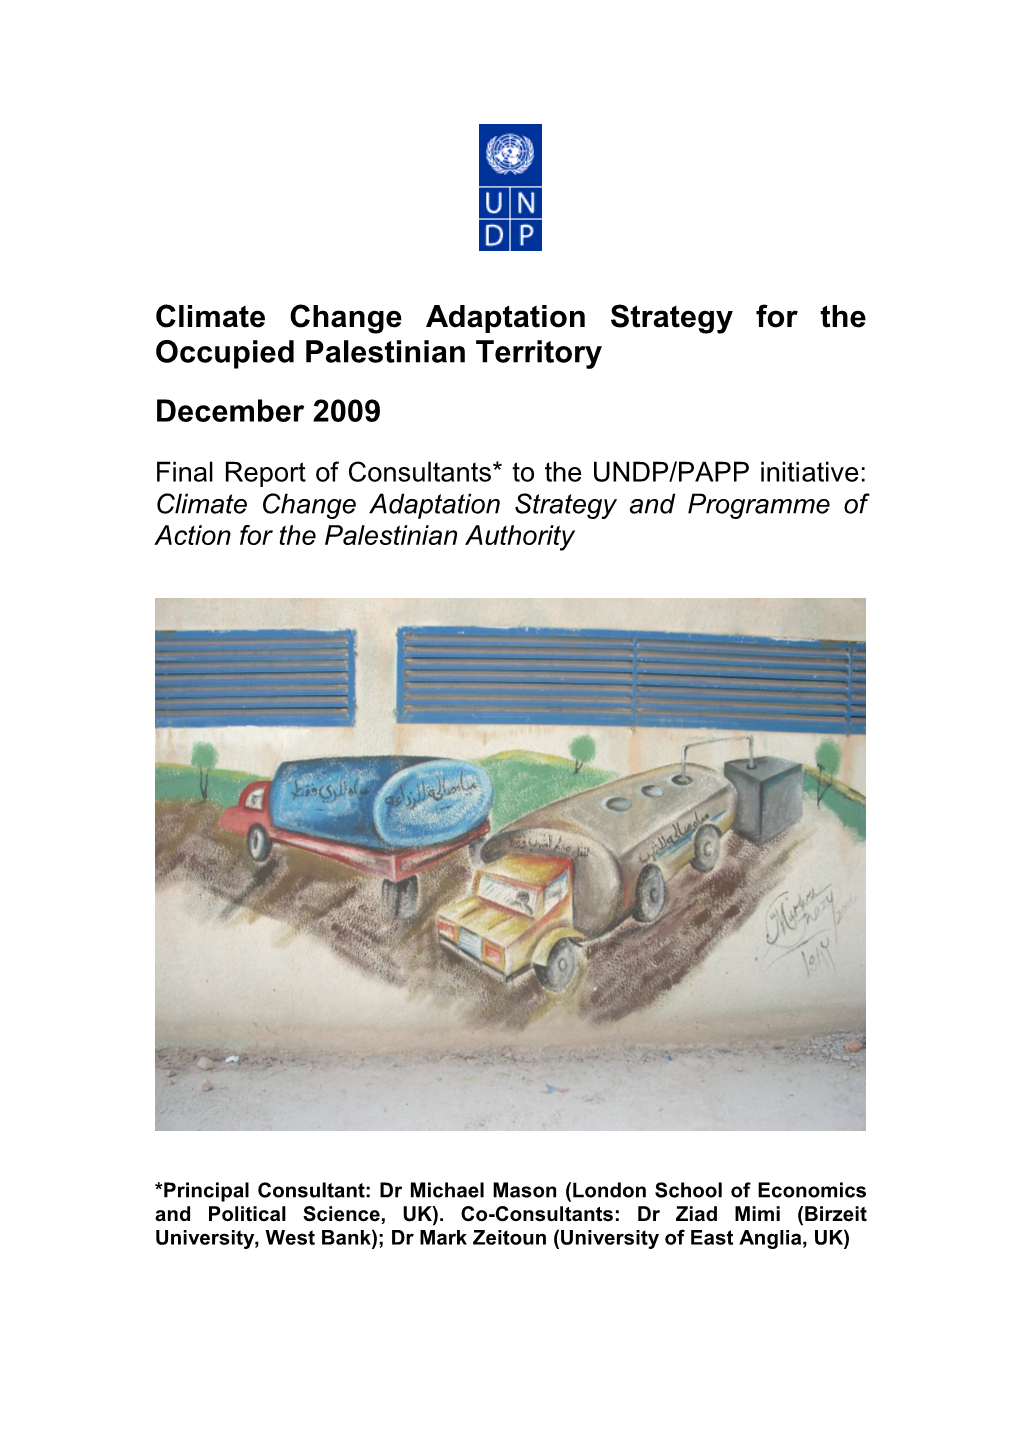 Climate Change Adaptation Strategy for the Occupied Palestinian Territory